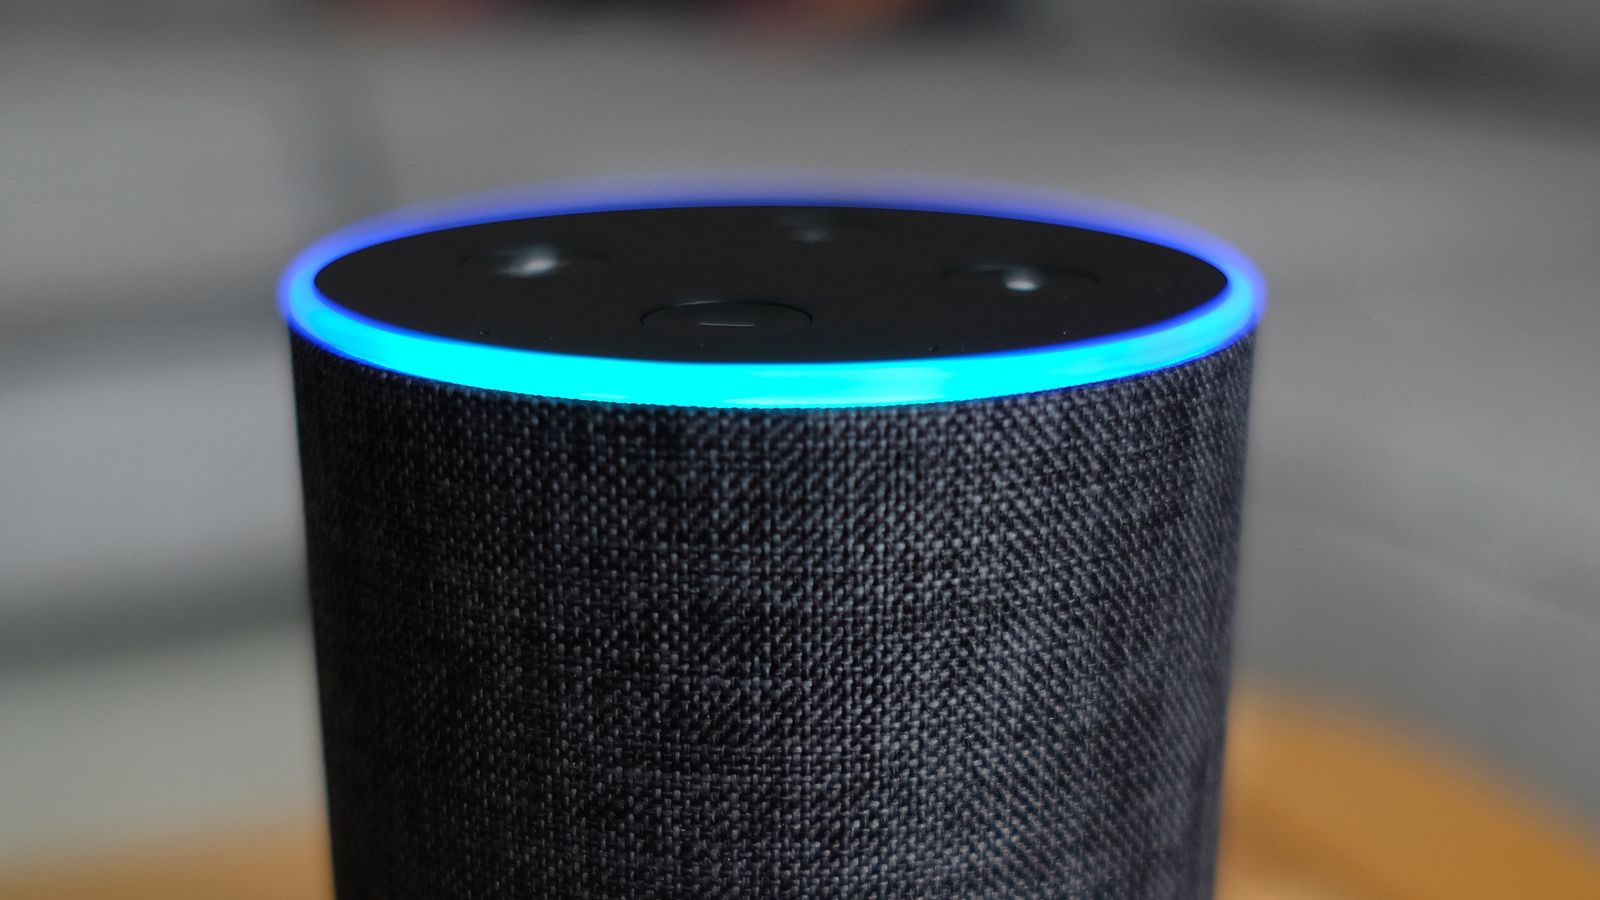 'Chilling' surge in use of smart speakers and baby monitors to control domestic abuse victims, MPs say